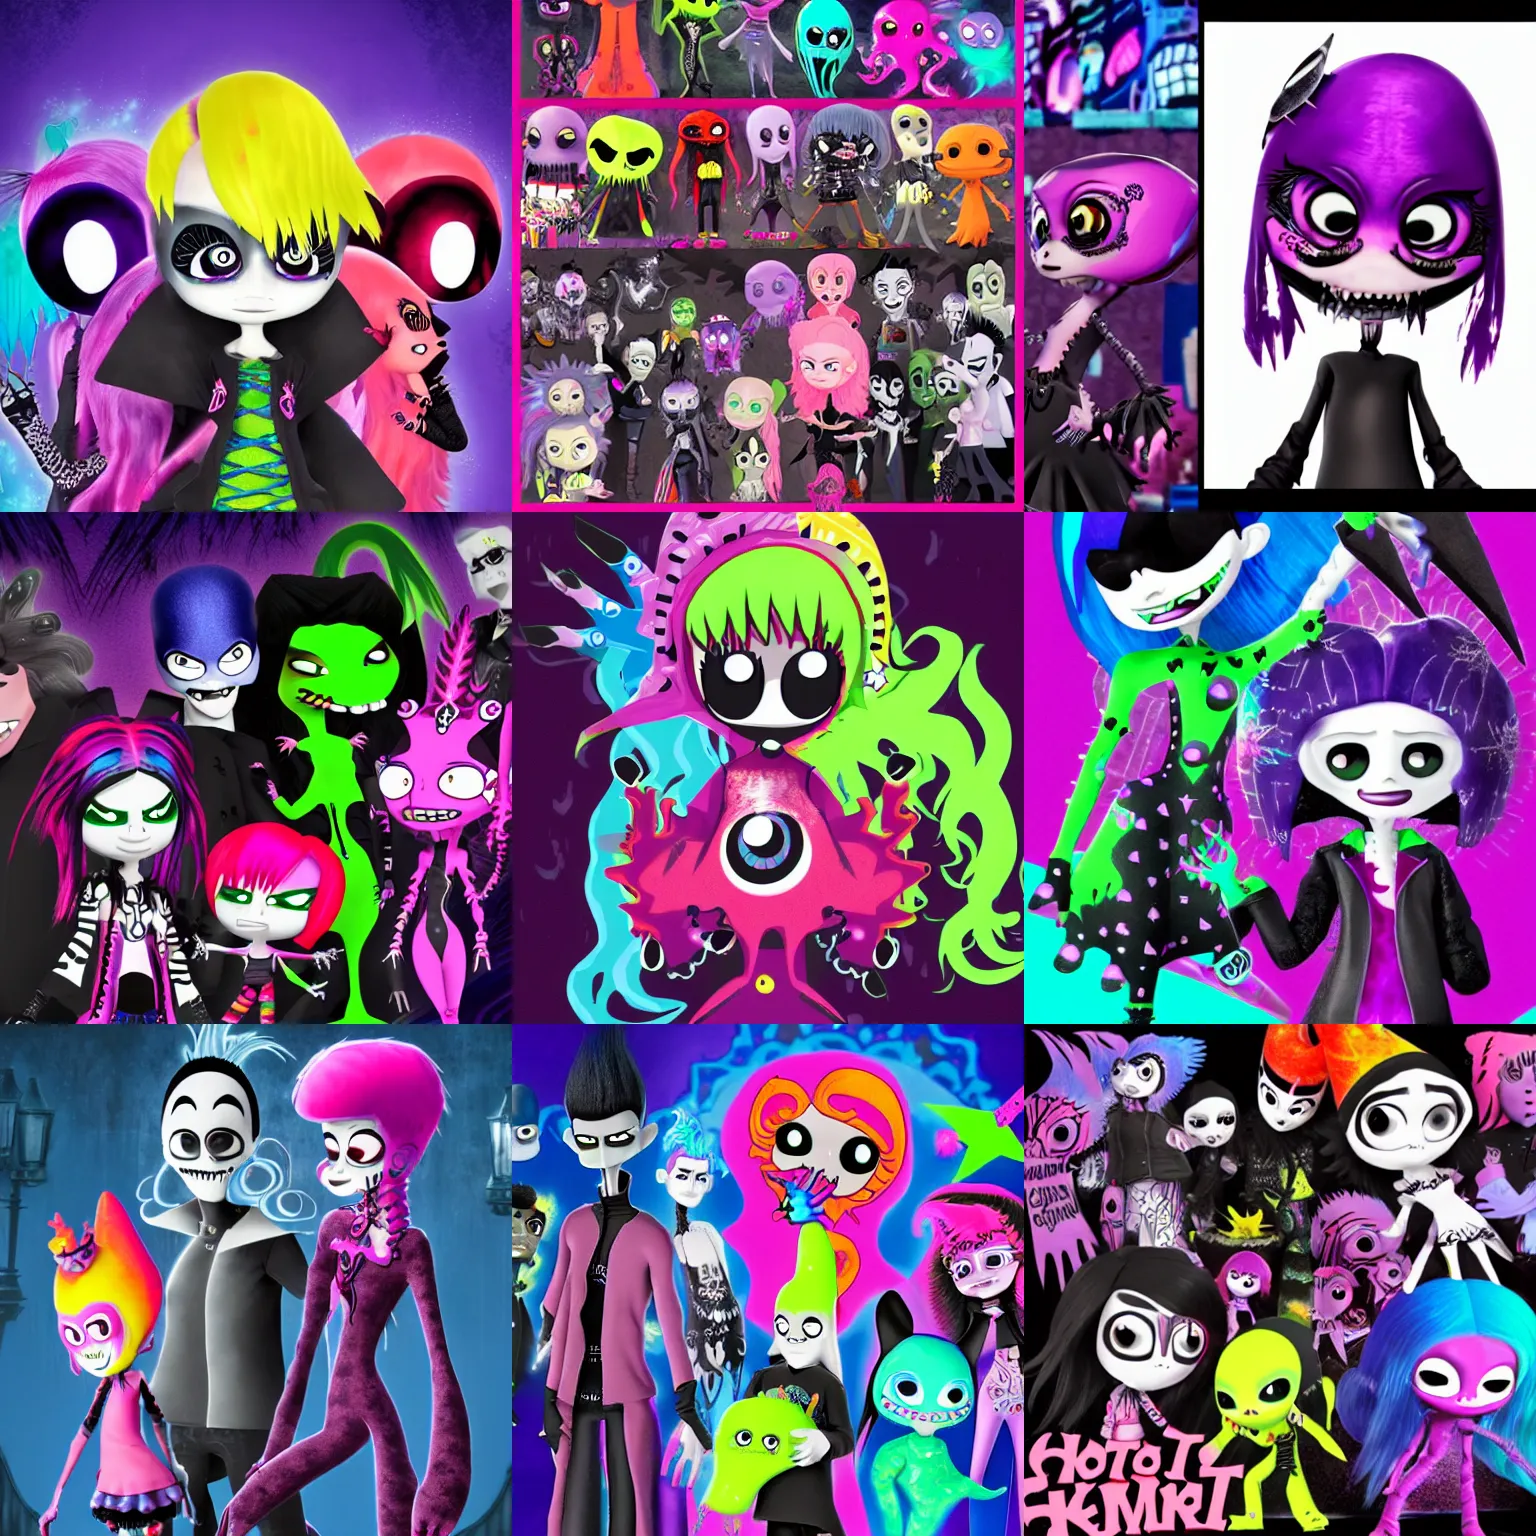 Prompt: CGI hot topic store lisa frank gothic emo punk vampiric rockstar vampire squid with transparent skin conceptual character designs of various shapes and sizes by genndy tartakovsky and splatoon by nintendo for the new hotel transylvania film starring a vampire squid kraken monster rockstar